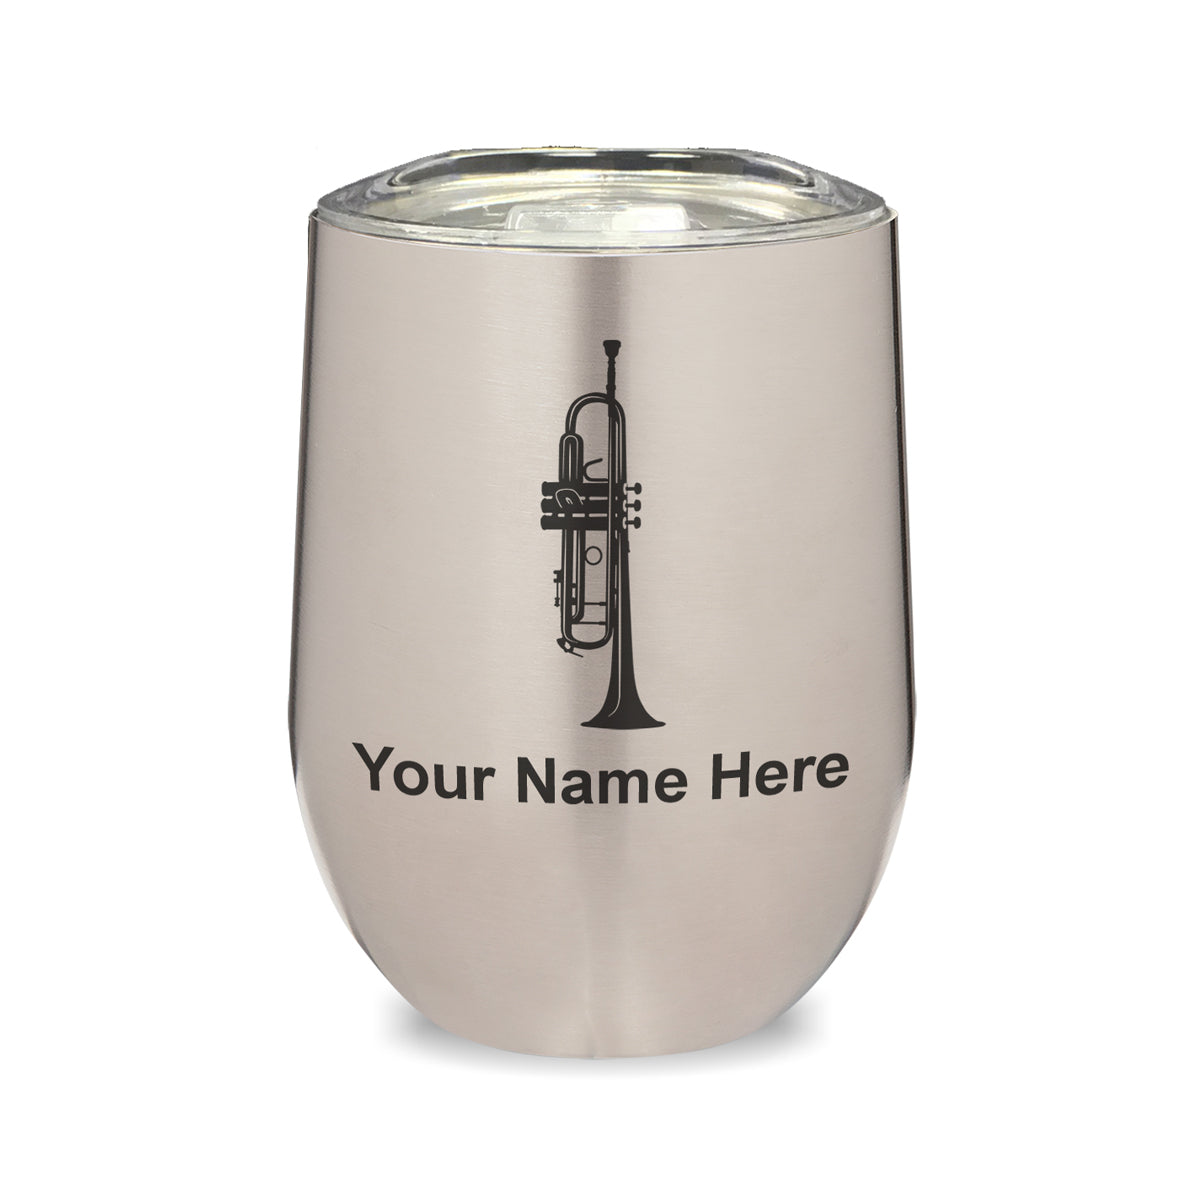 LaserGram Double Wall Stainless Steel Wine Glass, Trumpet, Personalized Engraving Included